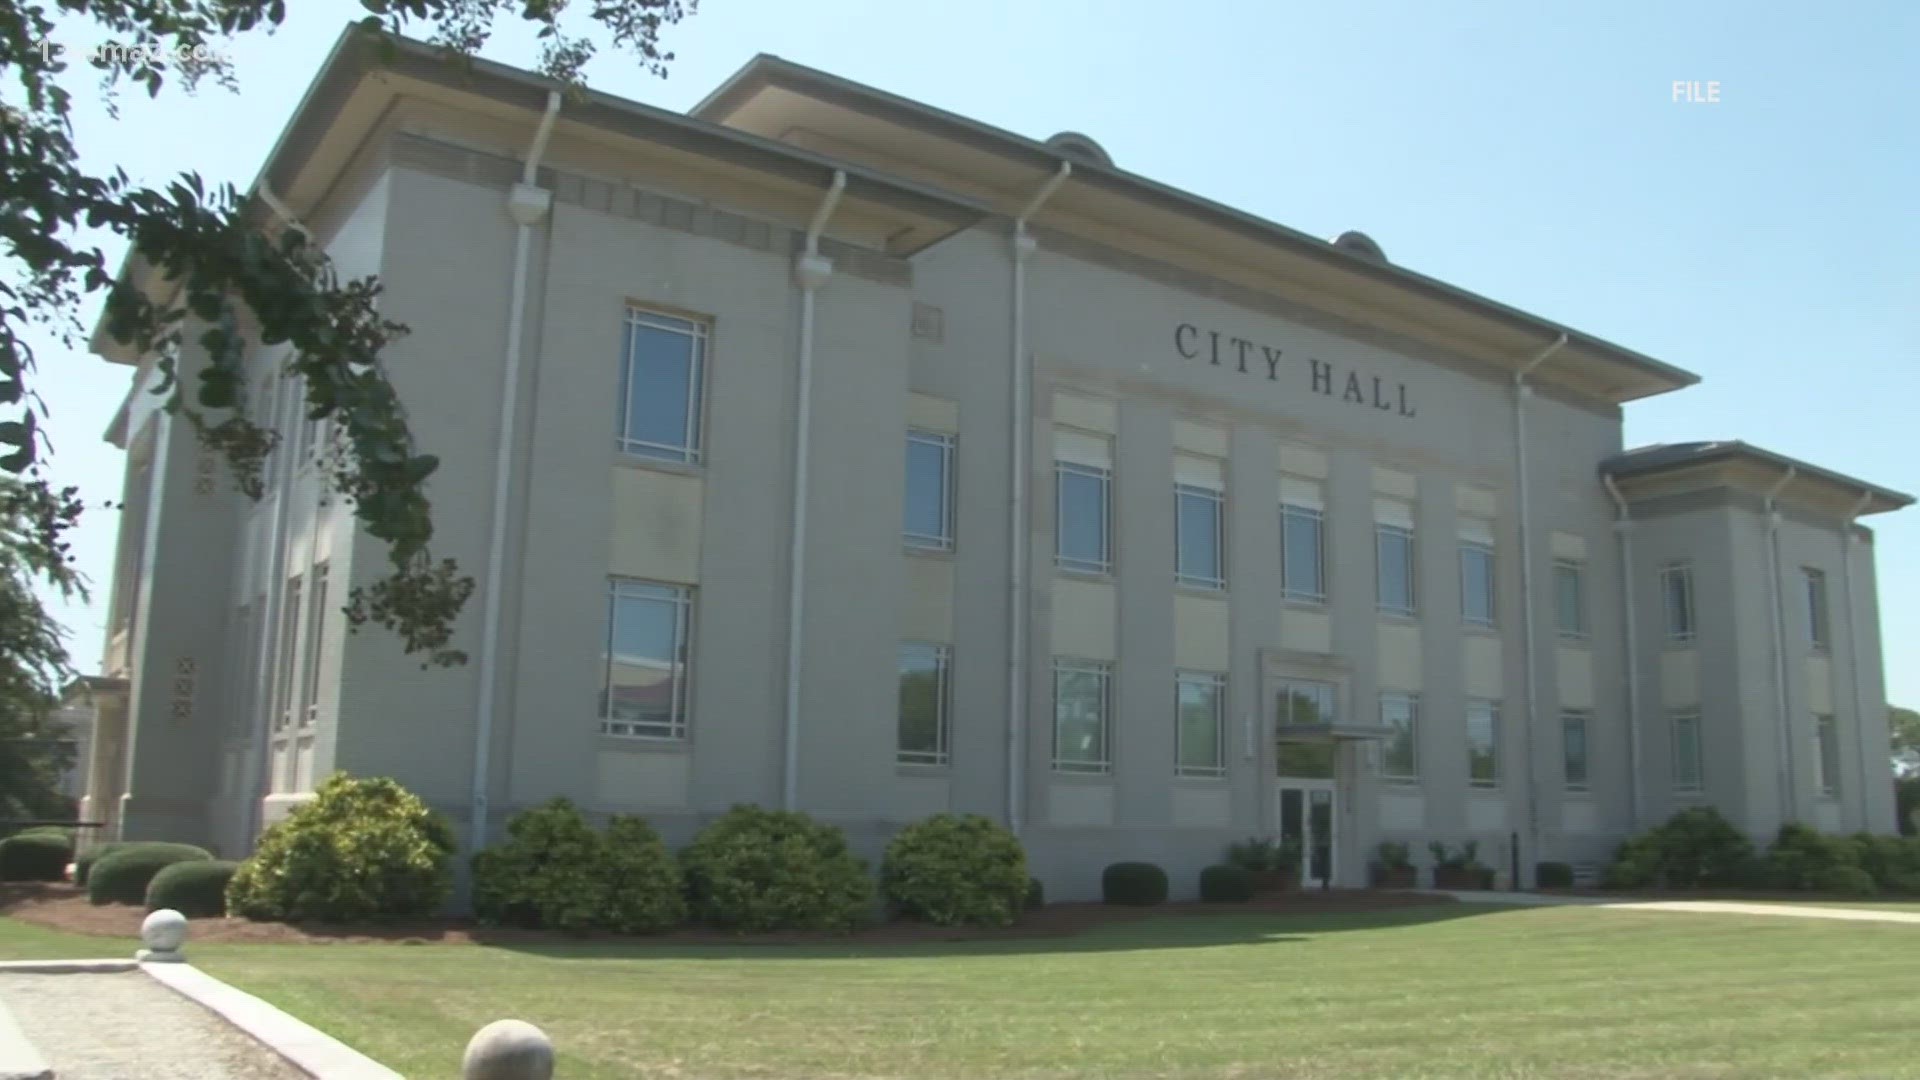 The City of Perry is considering rezoning parts of town in its latest economic development plan. Now, some people are speaking up about their concerns